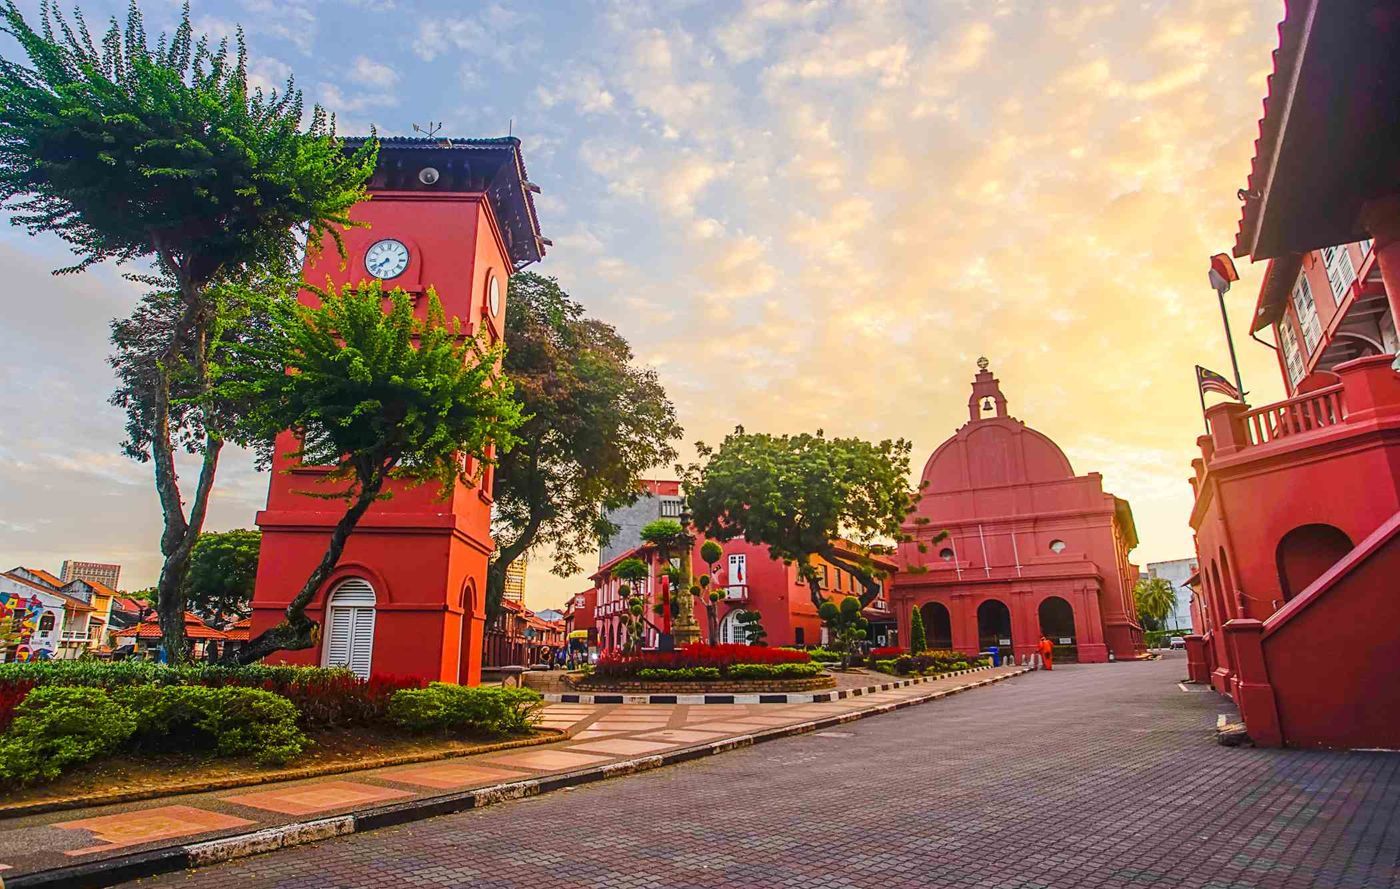 Visit Malacca, the old town in Malaysia